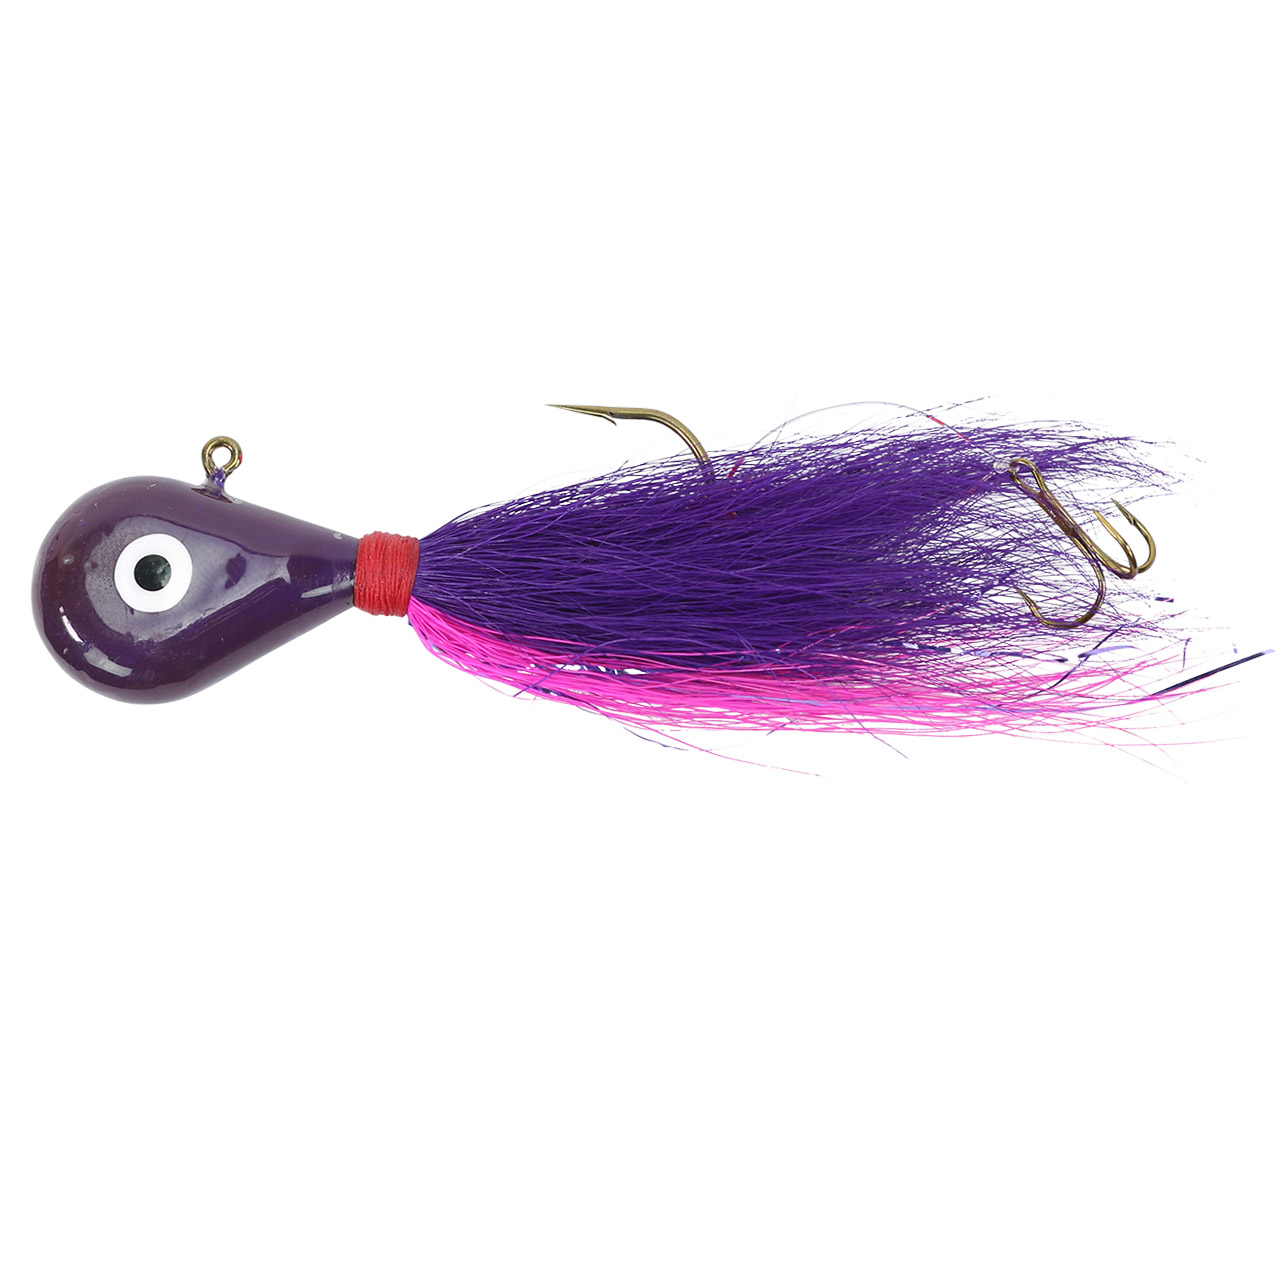  Pink Purple Octopus Prime Bucktail Jig with Teaser Tails - TT  - Cobia Striper Fluke - Saltwater Fishing Lure (3 oz) : Sports & Outdoors